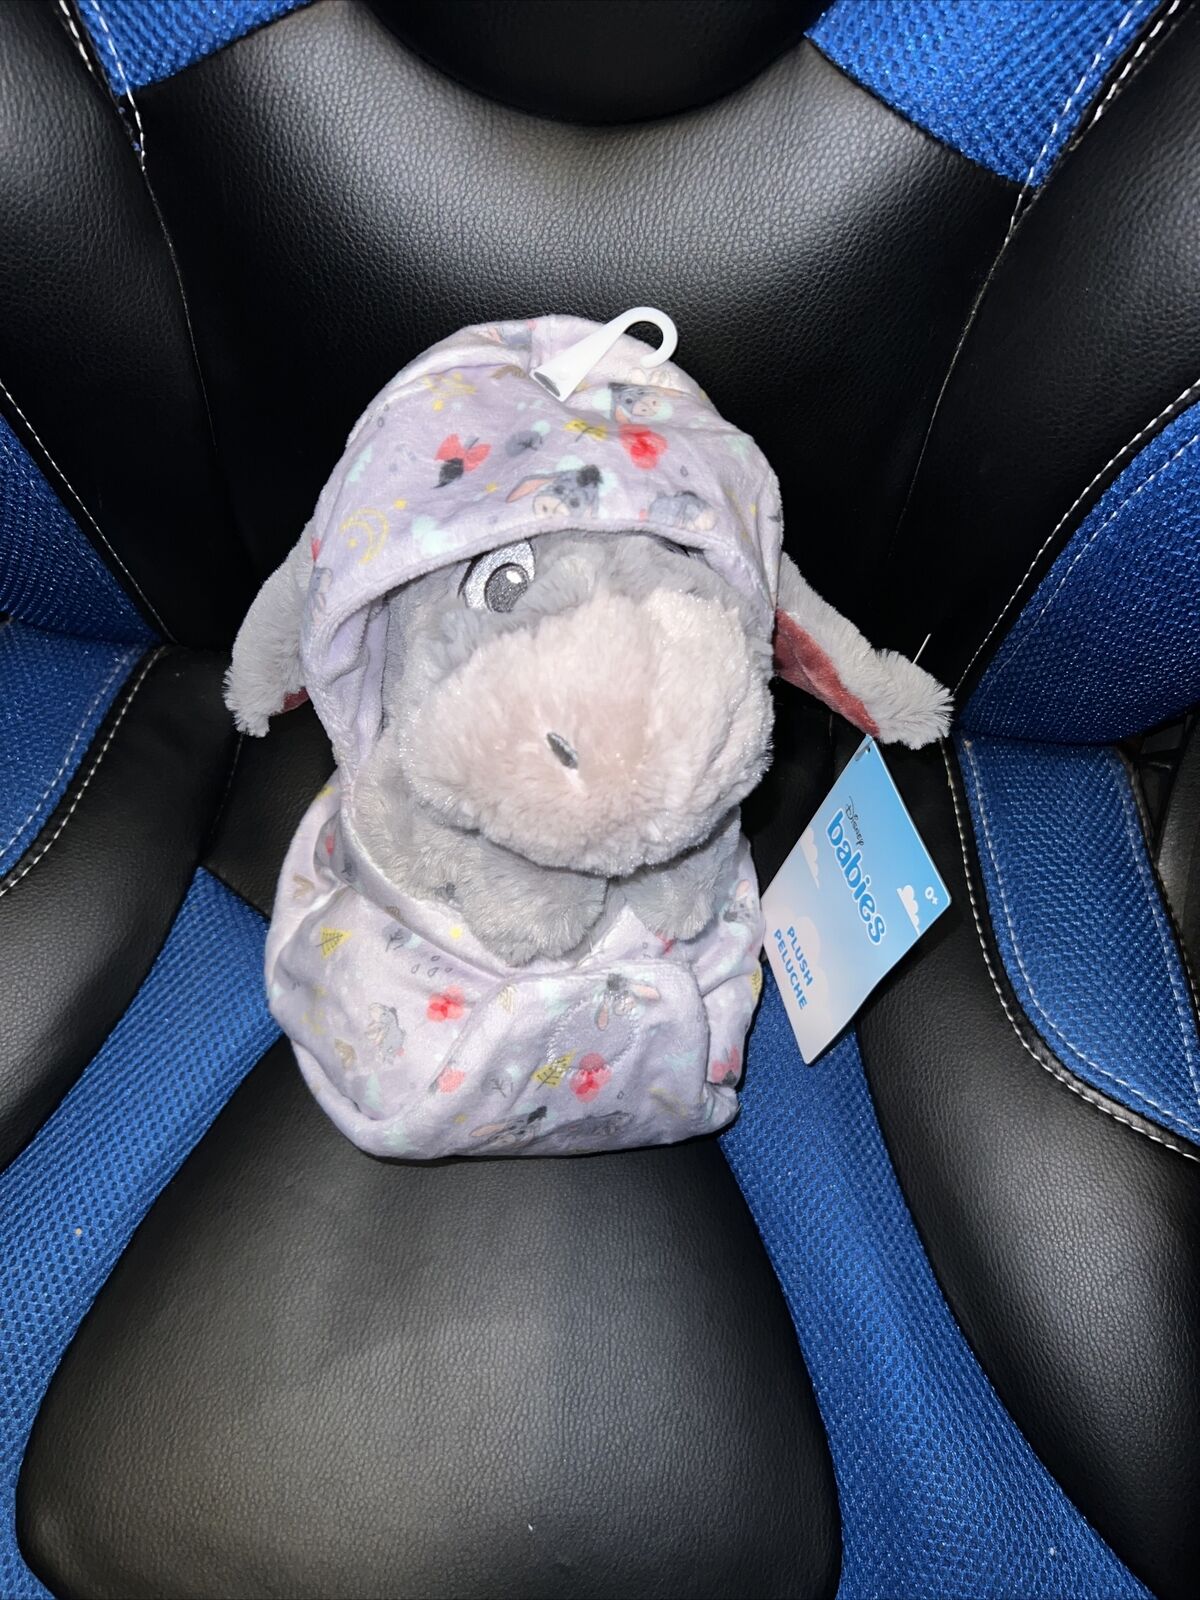 2023 Disney Parks Baby Eeyore in a Blanket Pouch Plush Winnie The Pooh New